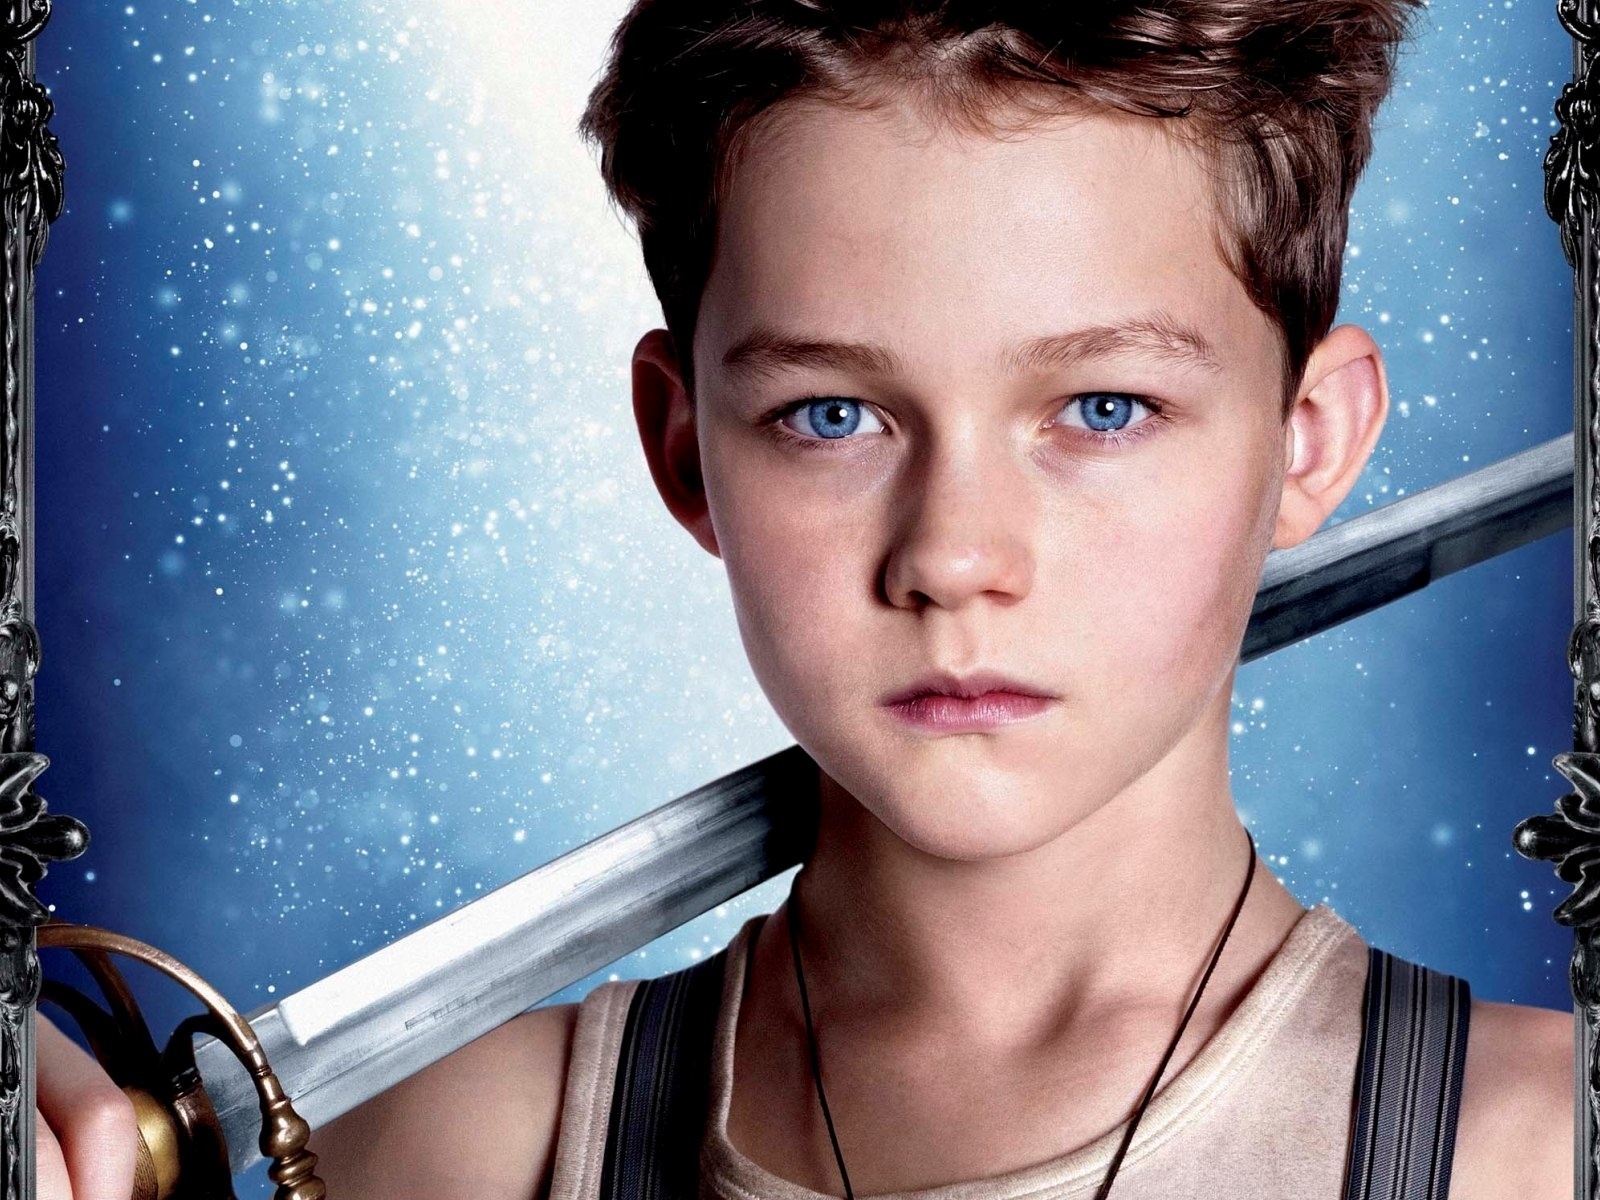 Pan Movie: Peter for 1600 x 1200 resolution